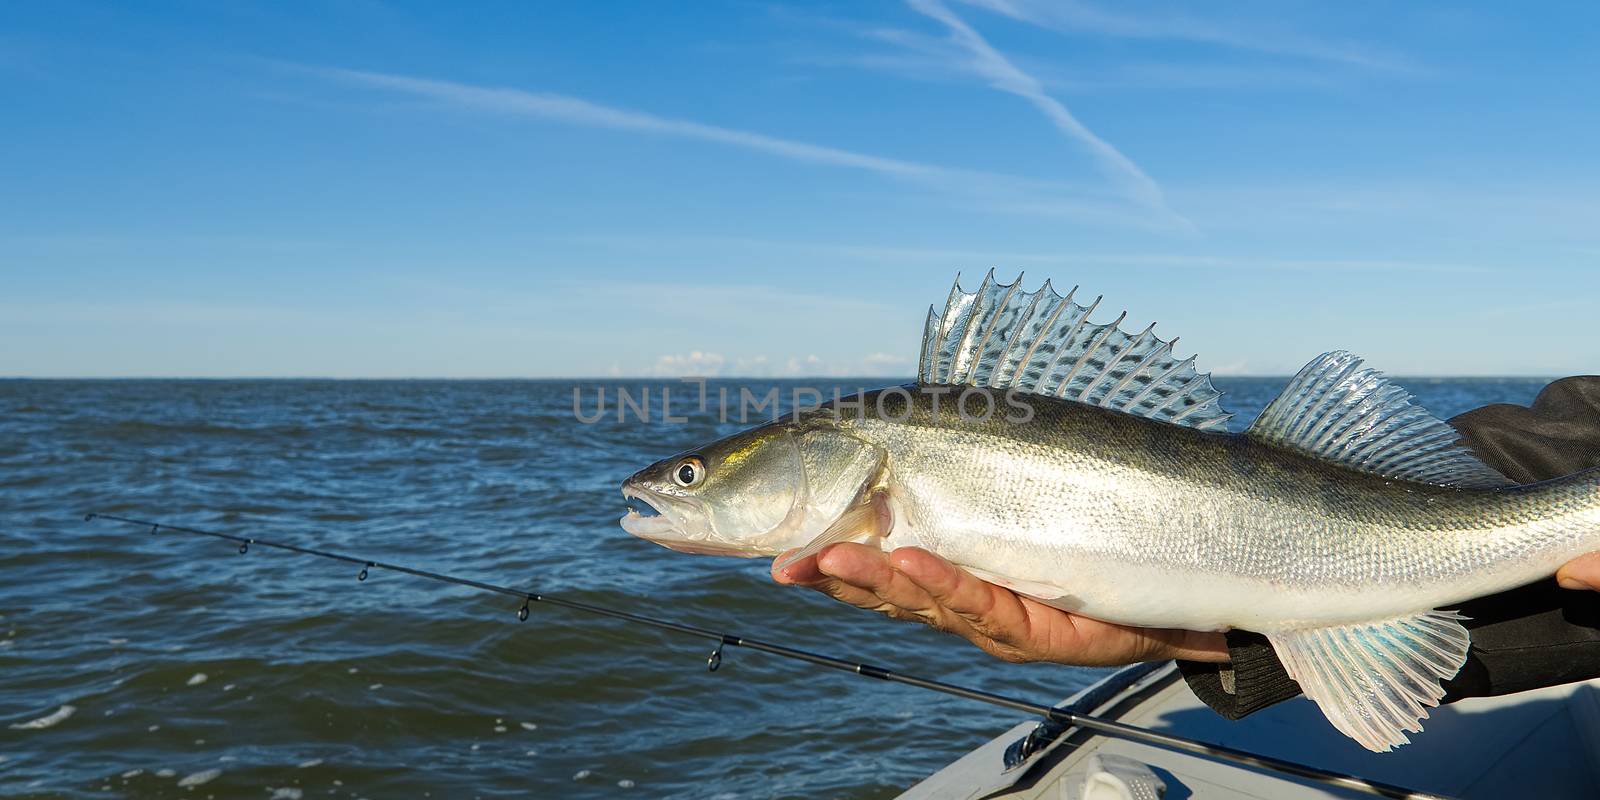 Fisherman holds a caught zander or pike perch in hands against t by PhotoTime